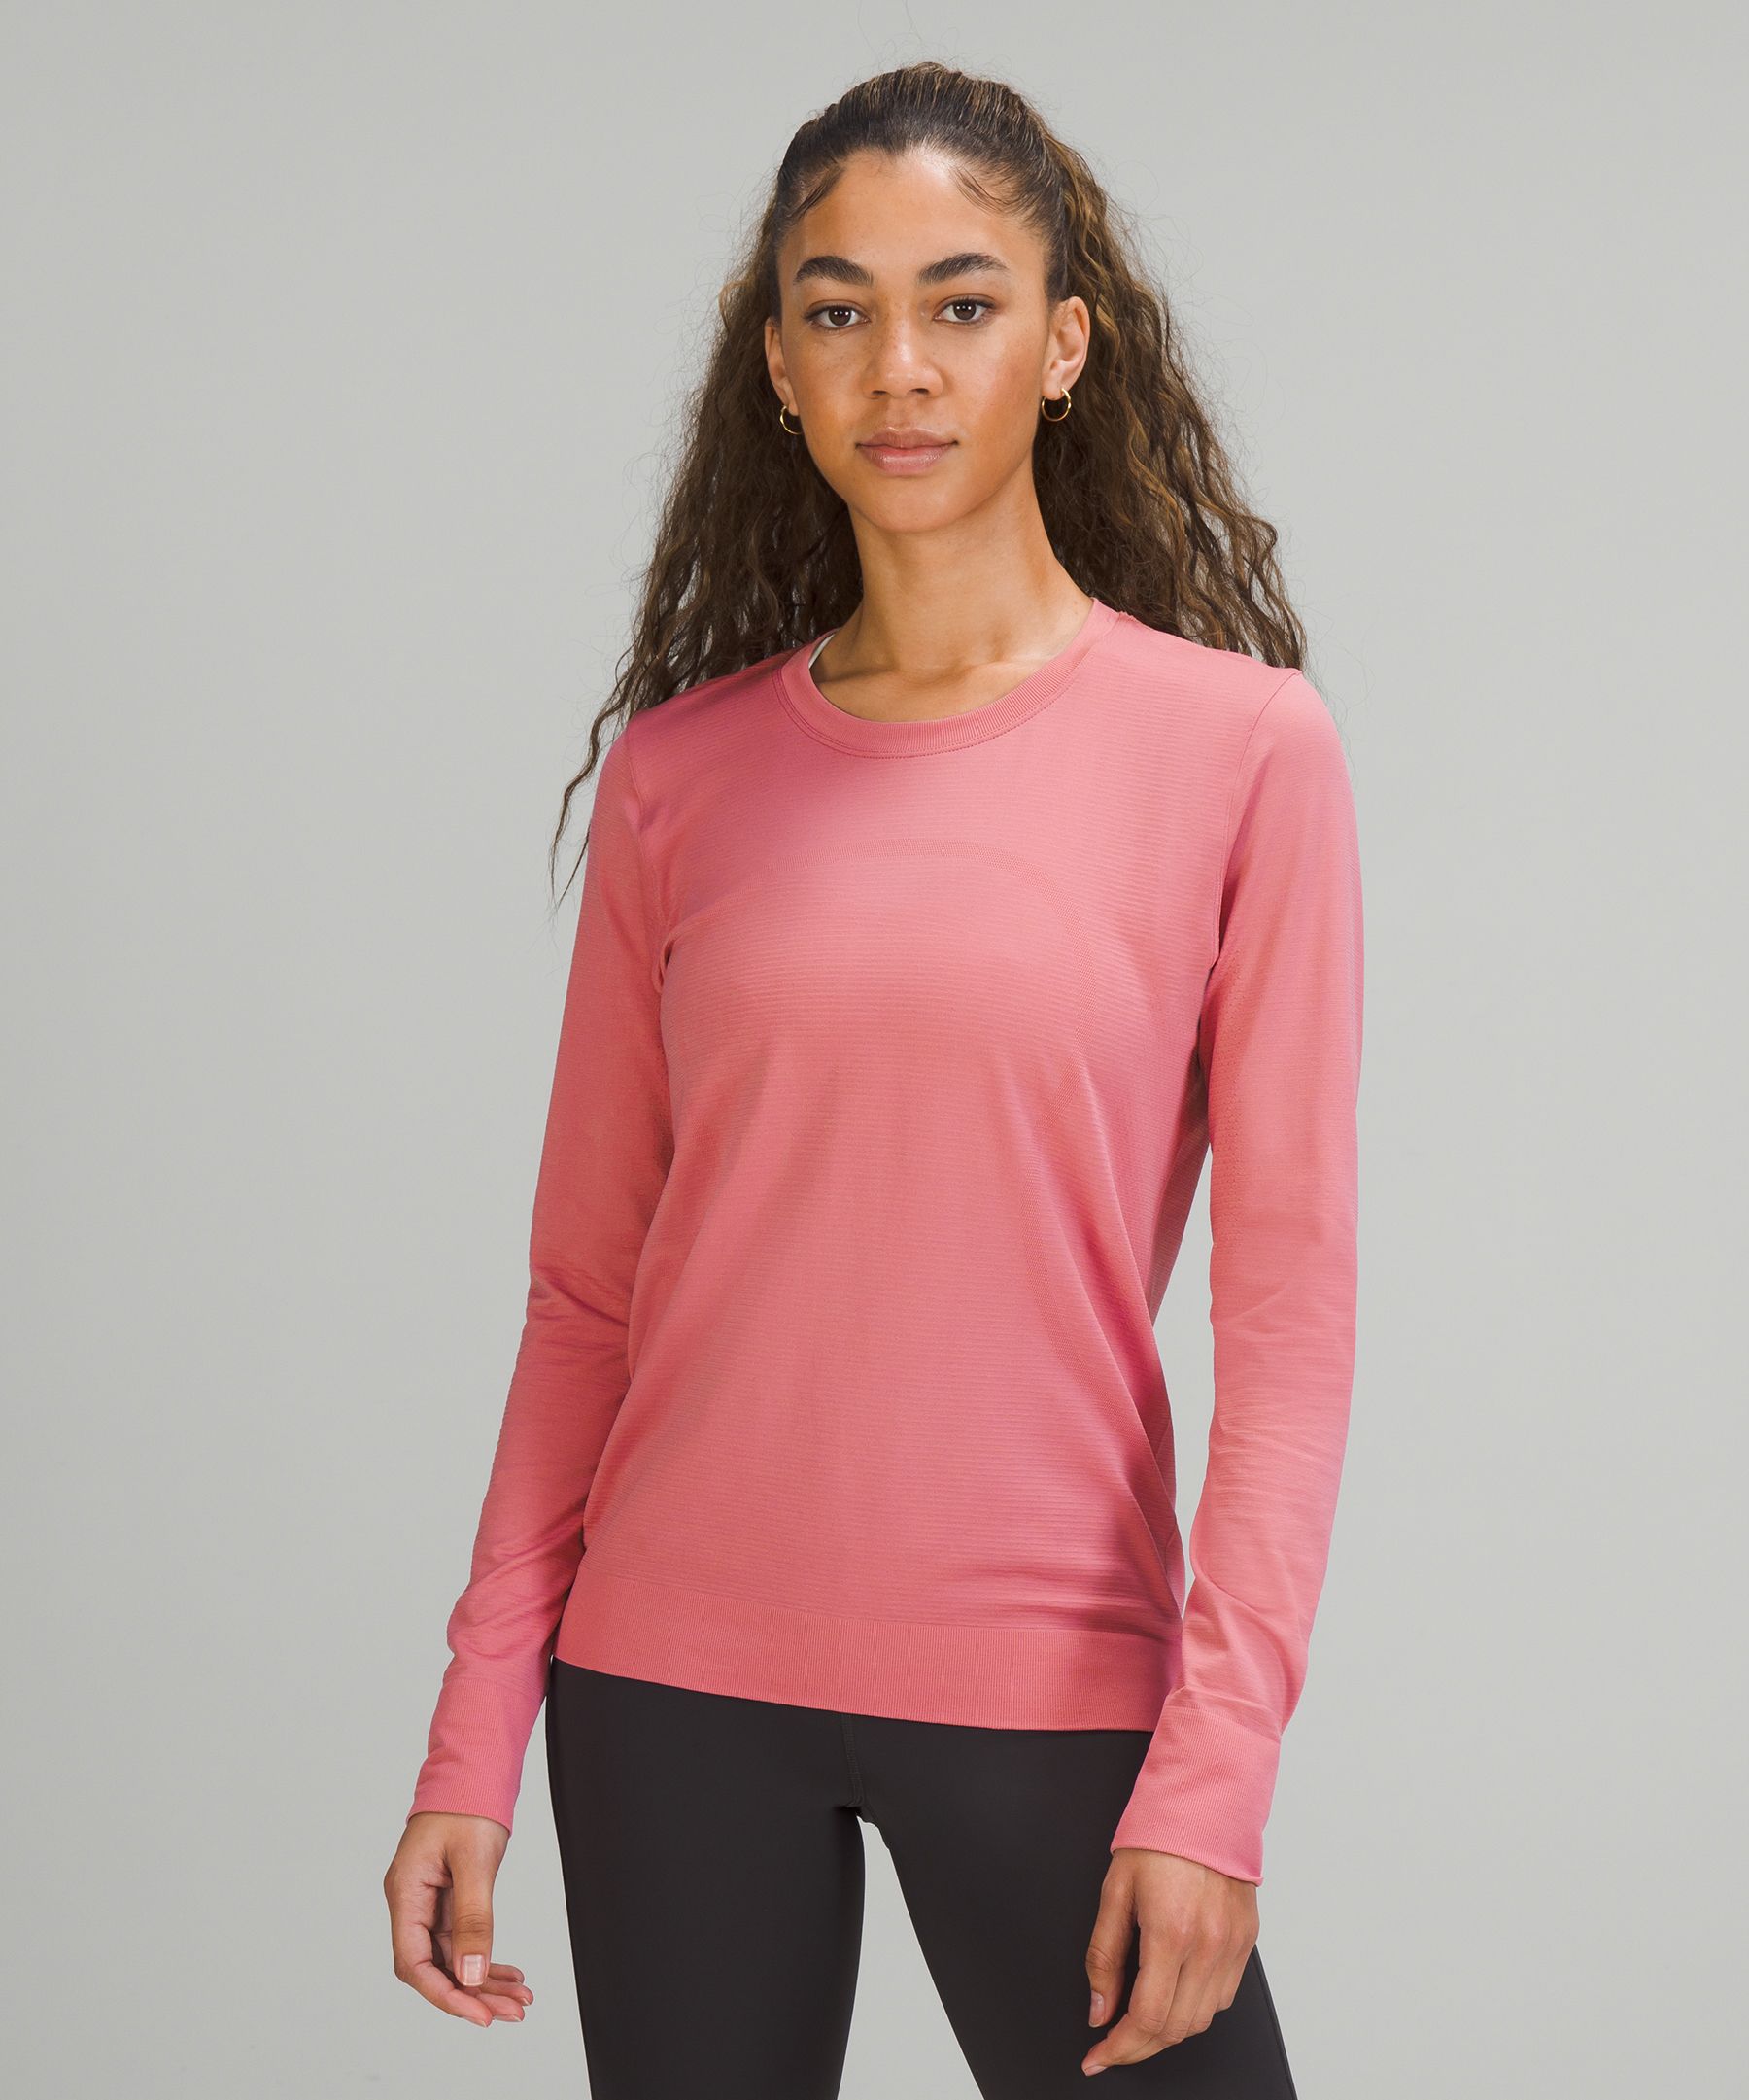 Lululemon Swiftly Relaxed Long Sleeve Shirt In Pink Blossom/pink Blossom